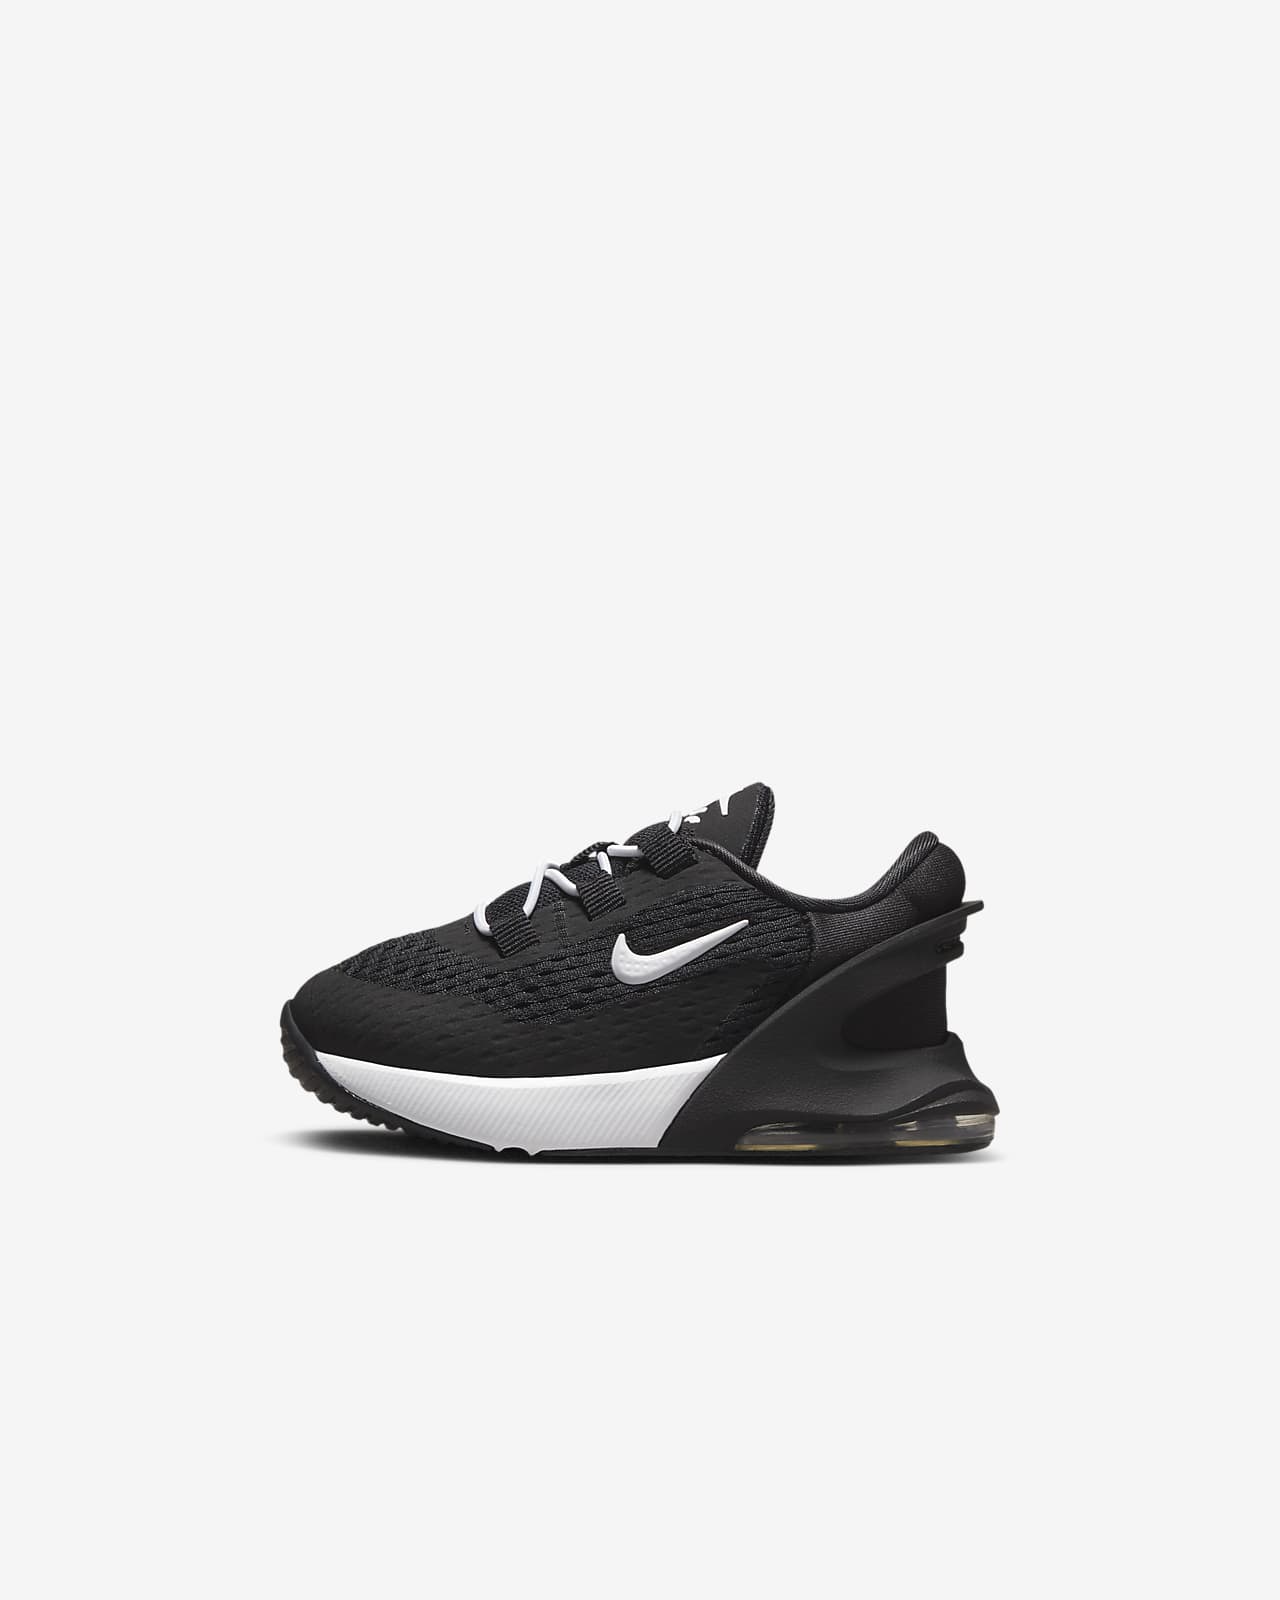 Nike Air Max 270 GO Baby/Toddler Easy On/Off Shoes. Nike SE